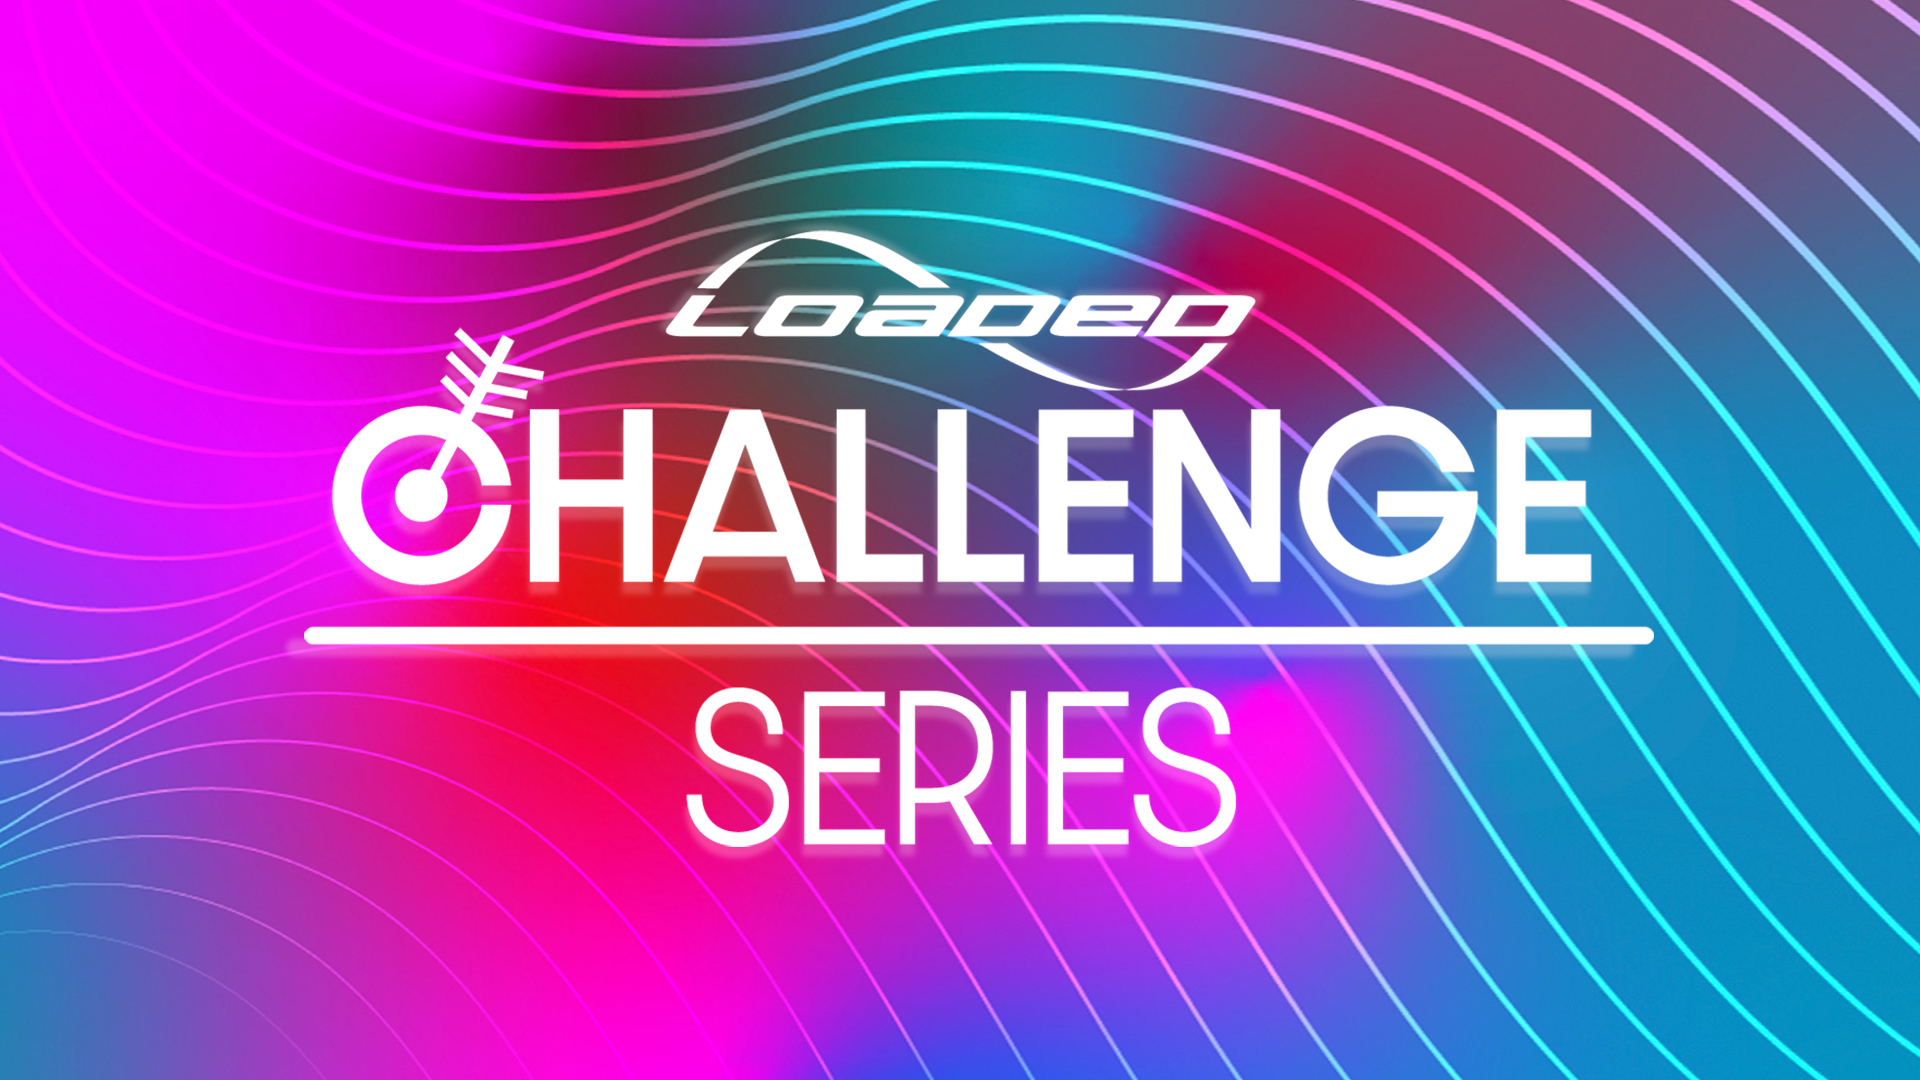 Loaded Challenge Series Welcome